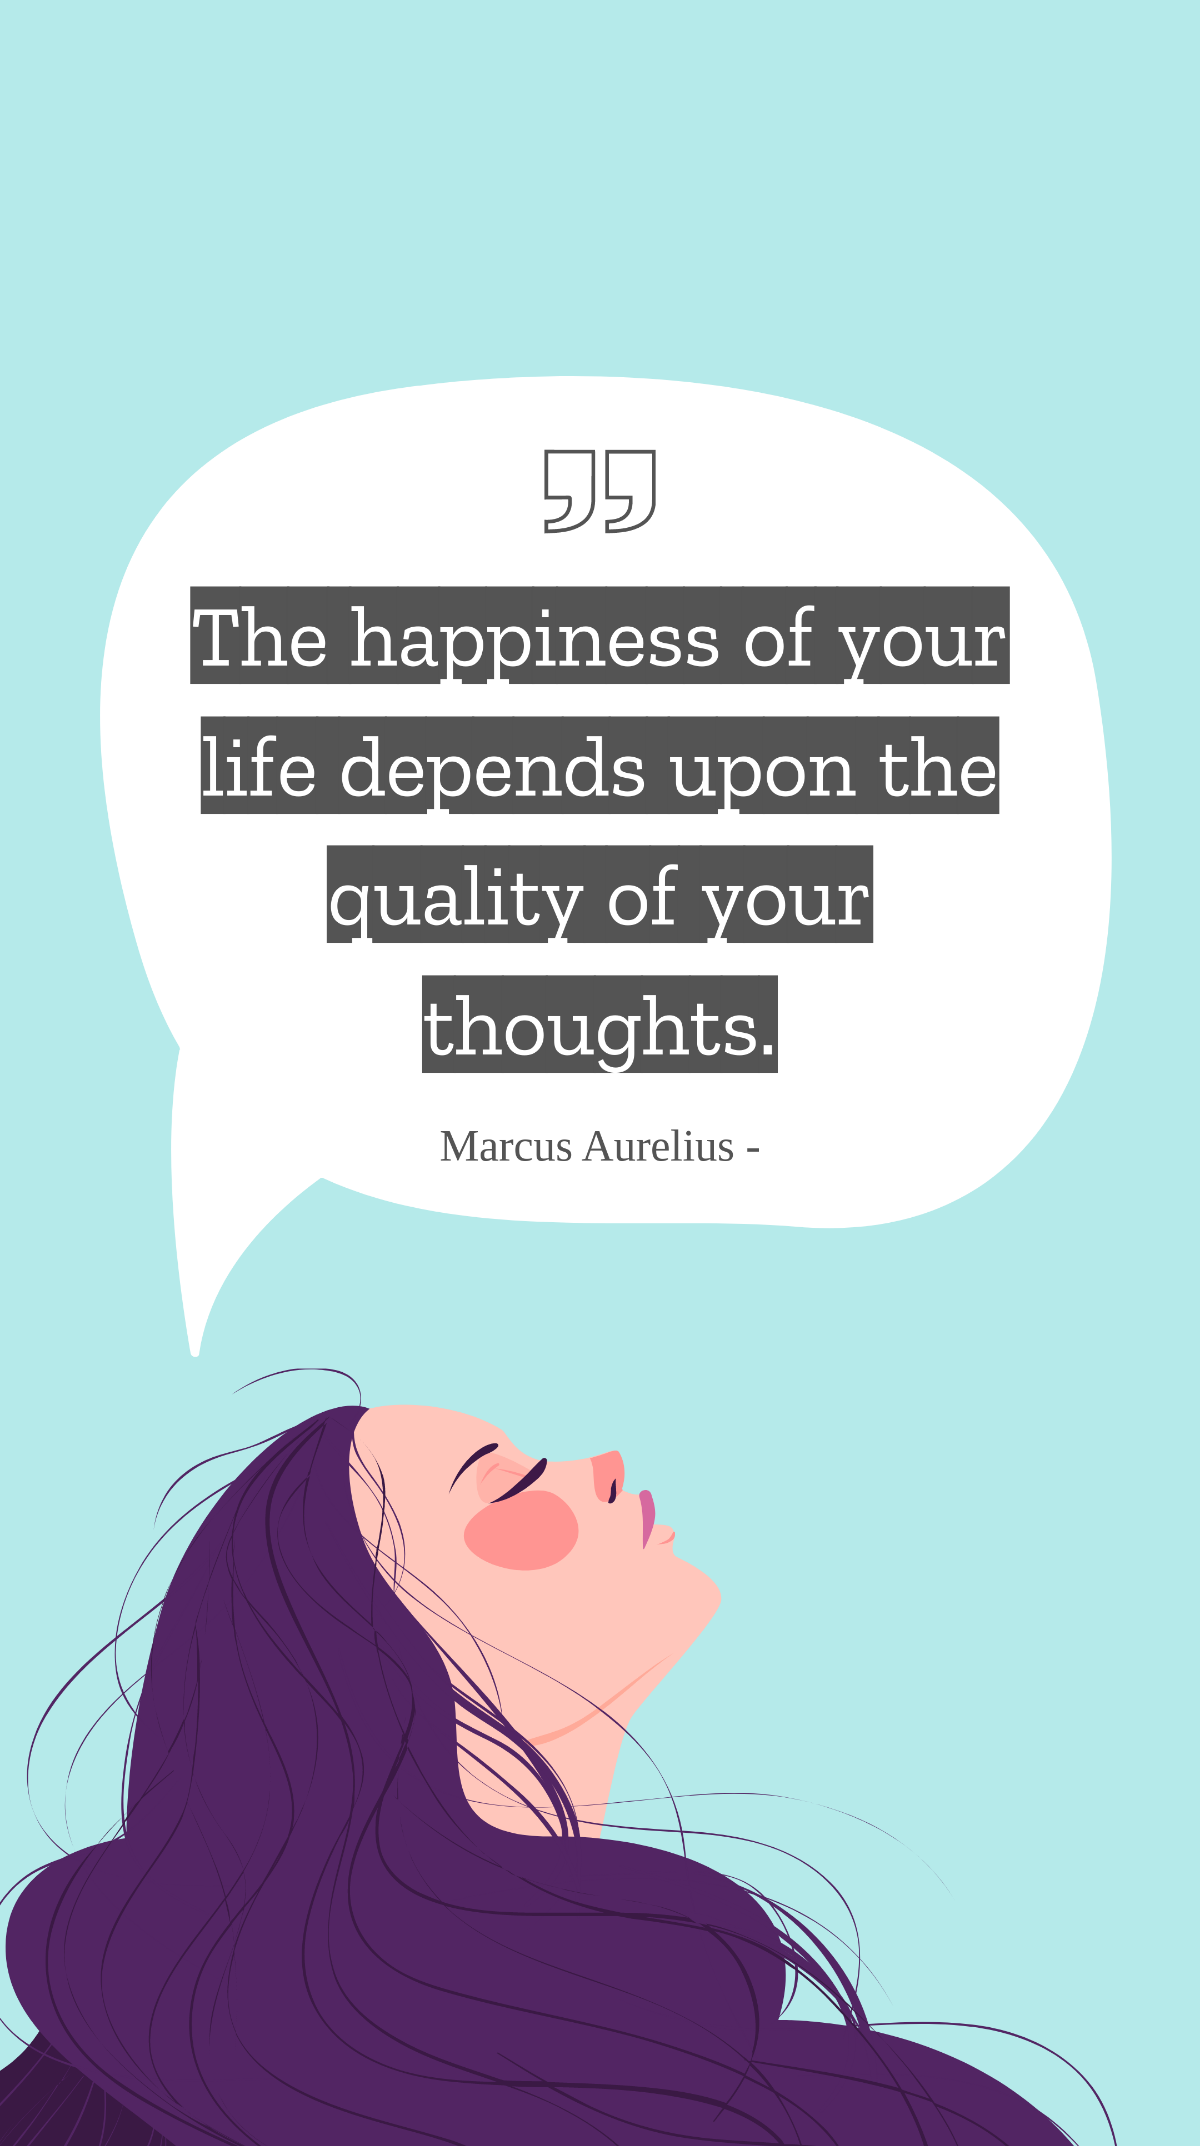 Marcus Aurelius - The happiness of your life depends upon the quality of your thoughts. Template